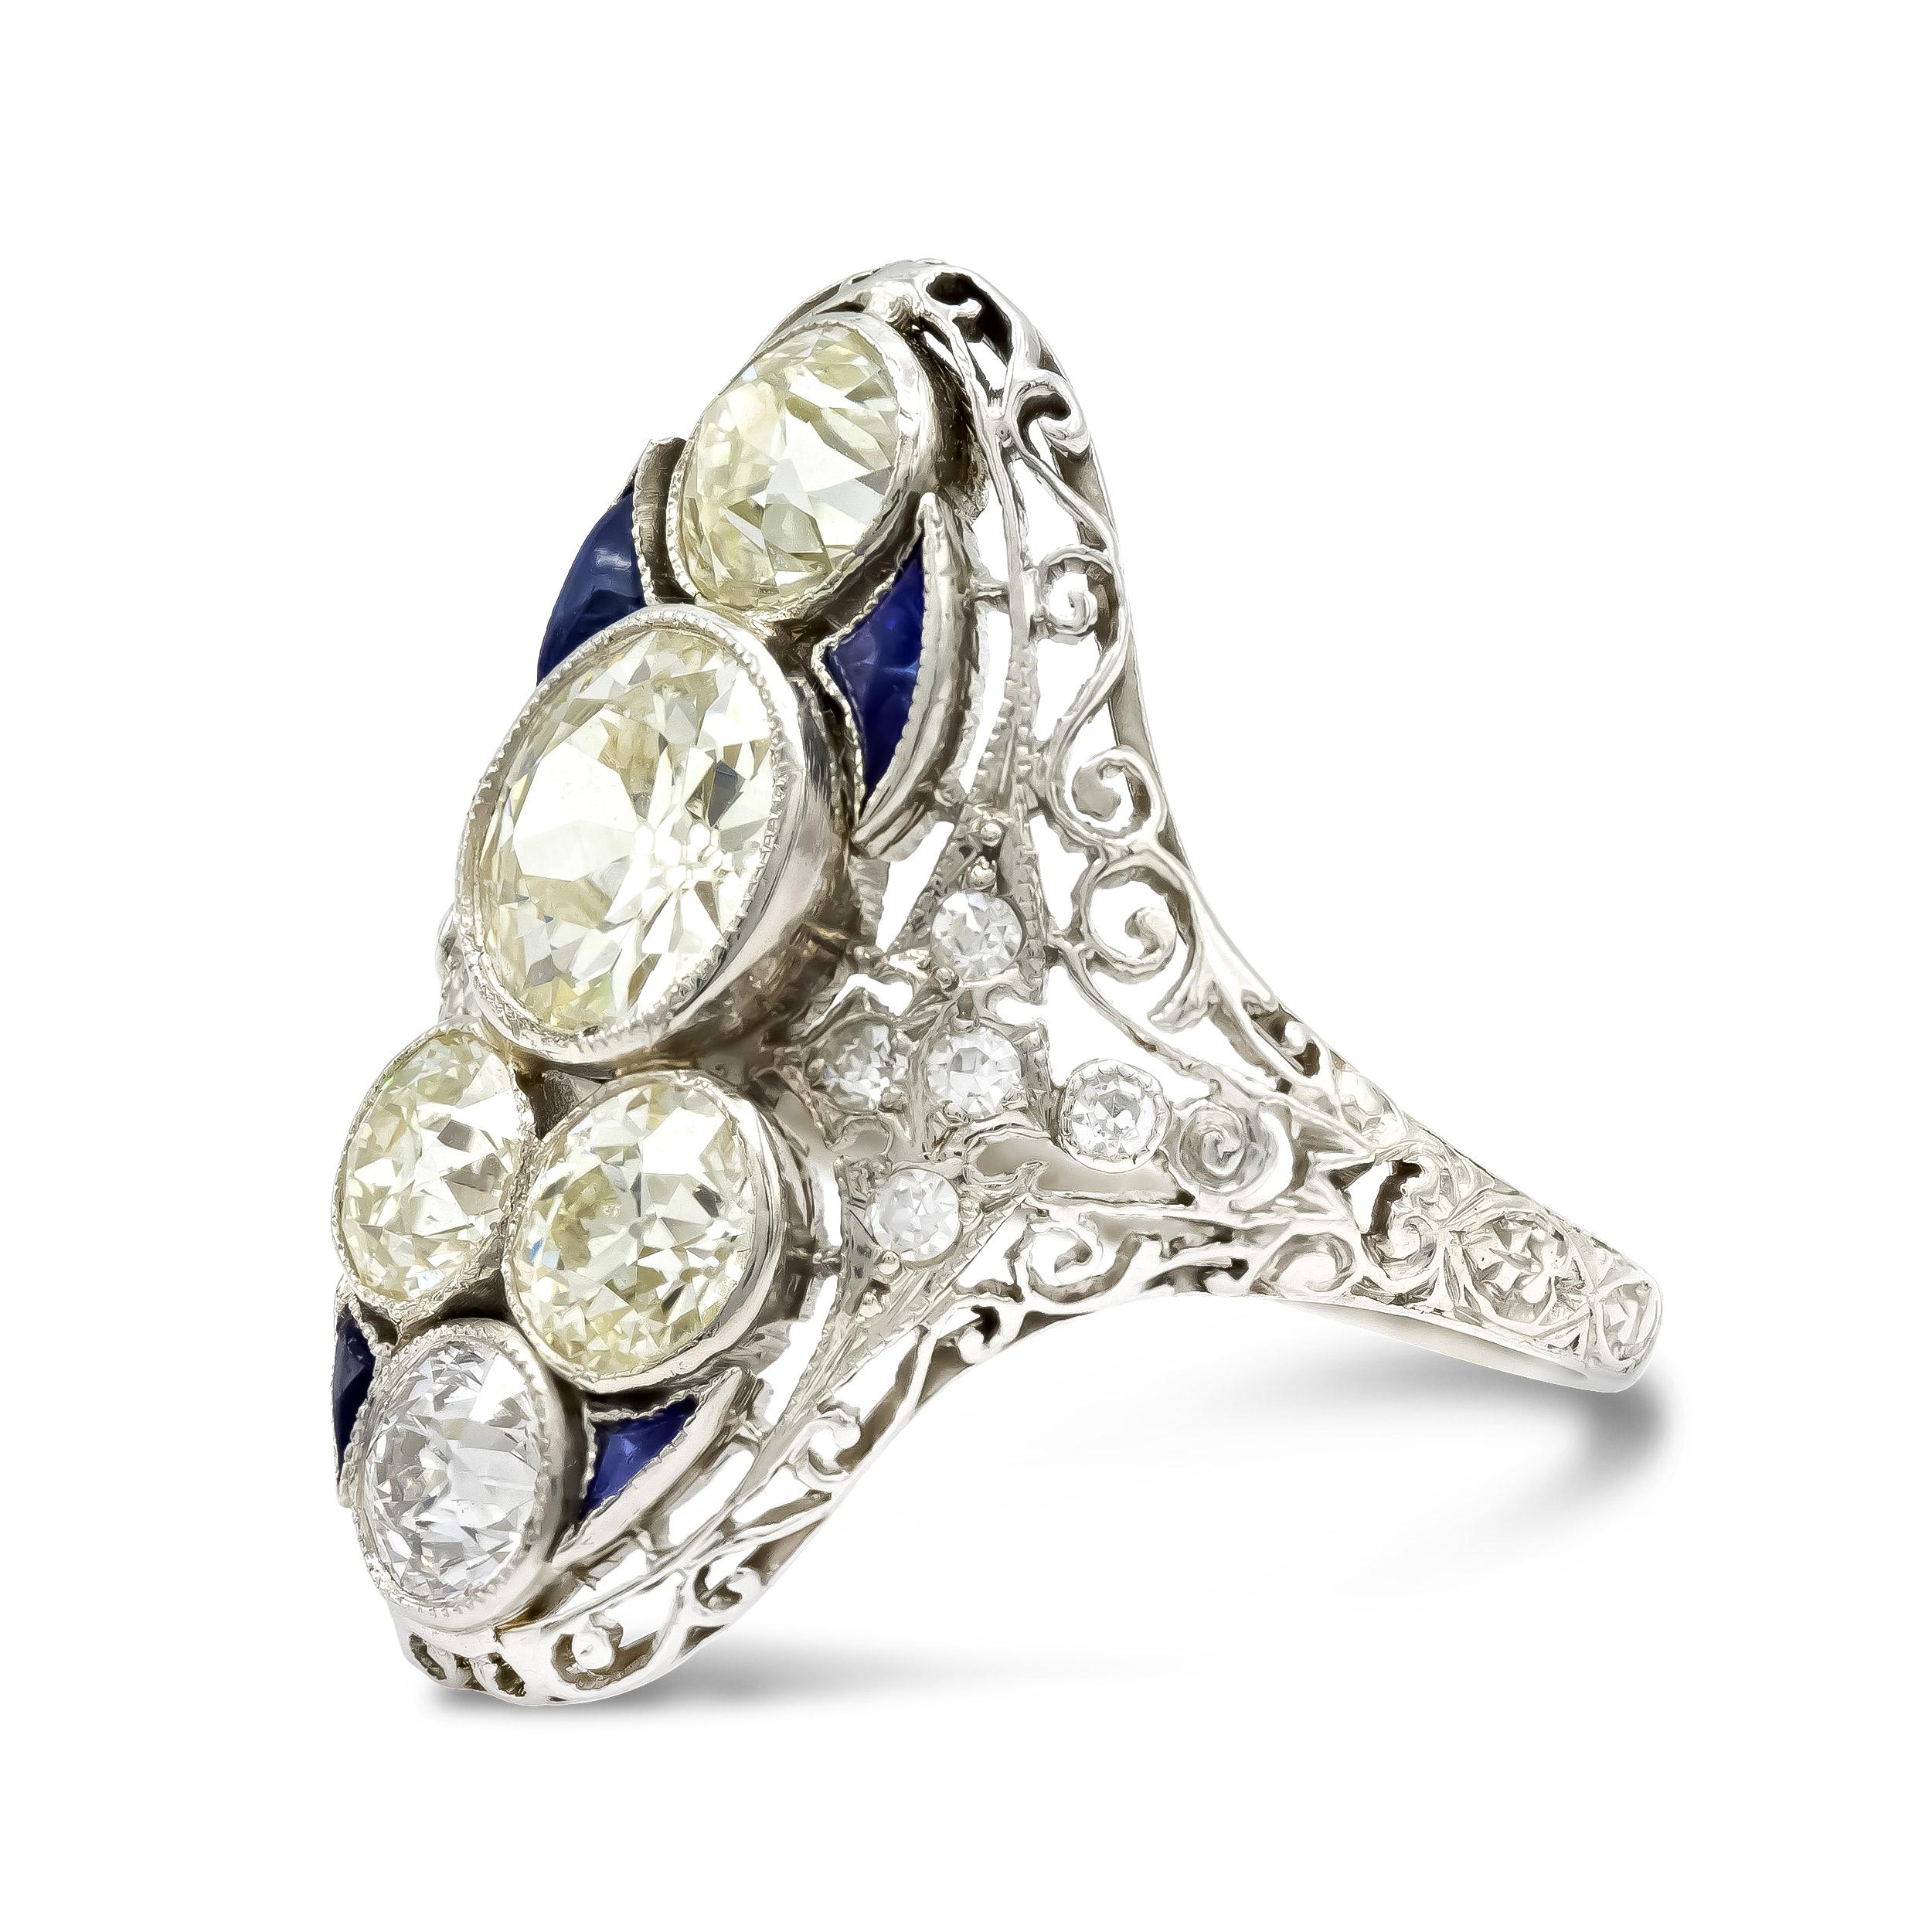 You certainly don’t need a drink—or occasion—to show off this inimitable Art Deco cocktail ring. A bright, colorless 1.15 ct. old European diamond with a spectacular spread and distinct, flowery facet scintillates at the center and is accented by an